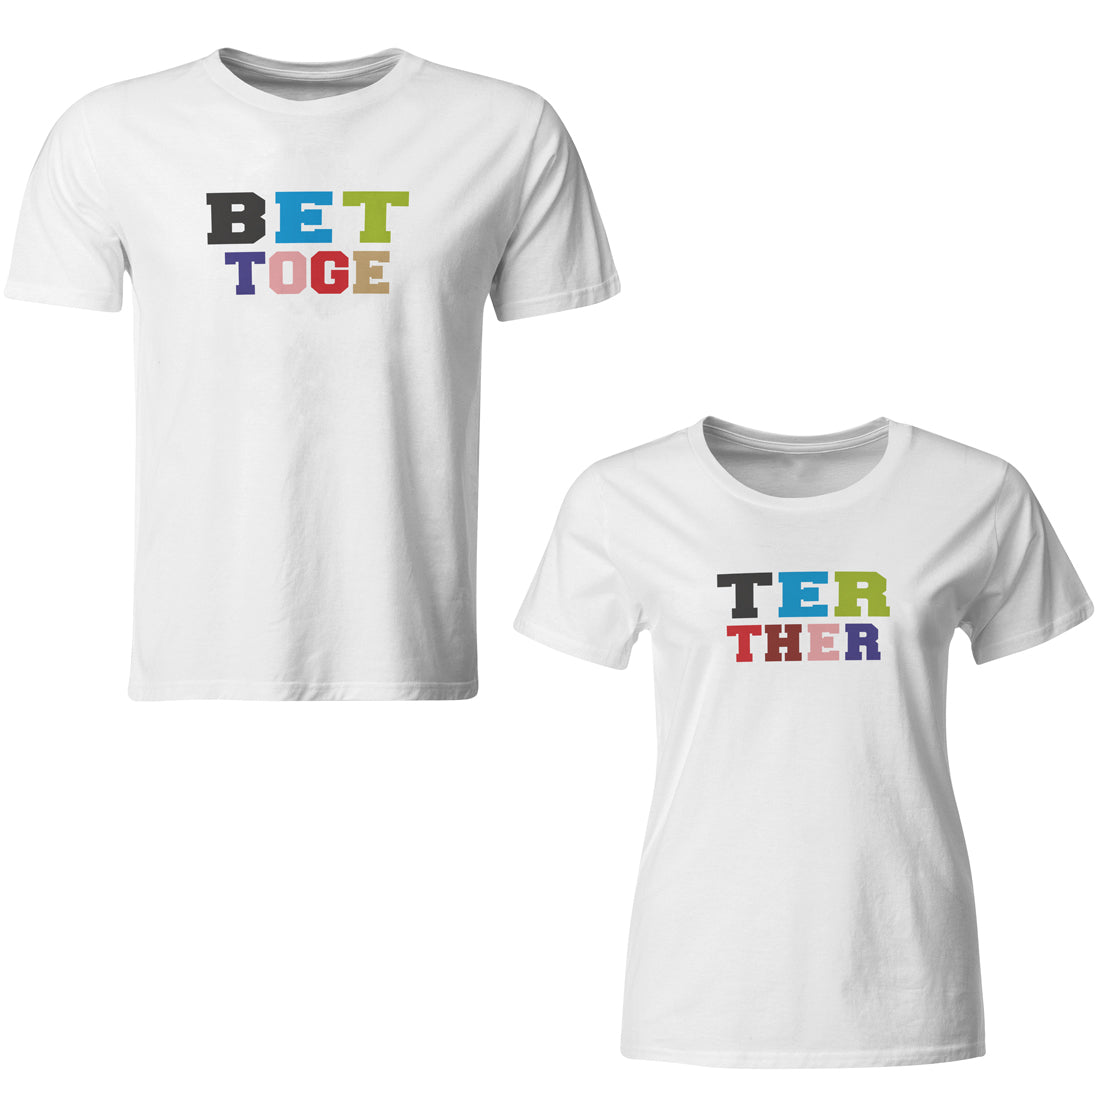 Better Together matching Couple T shirts- White